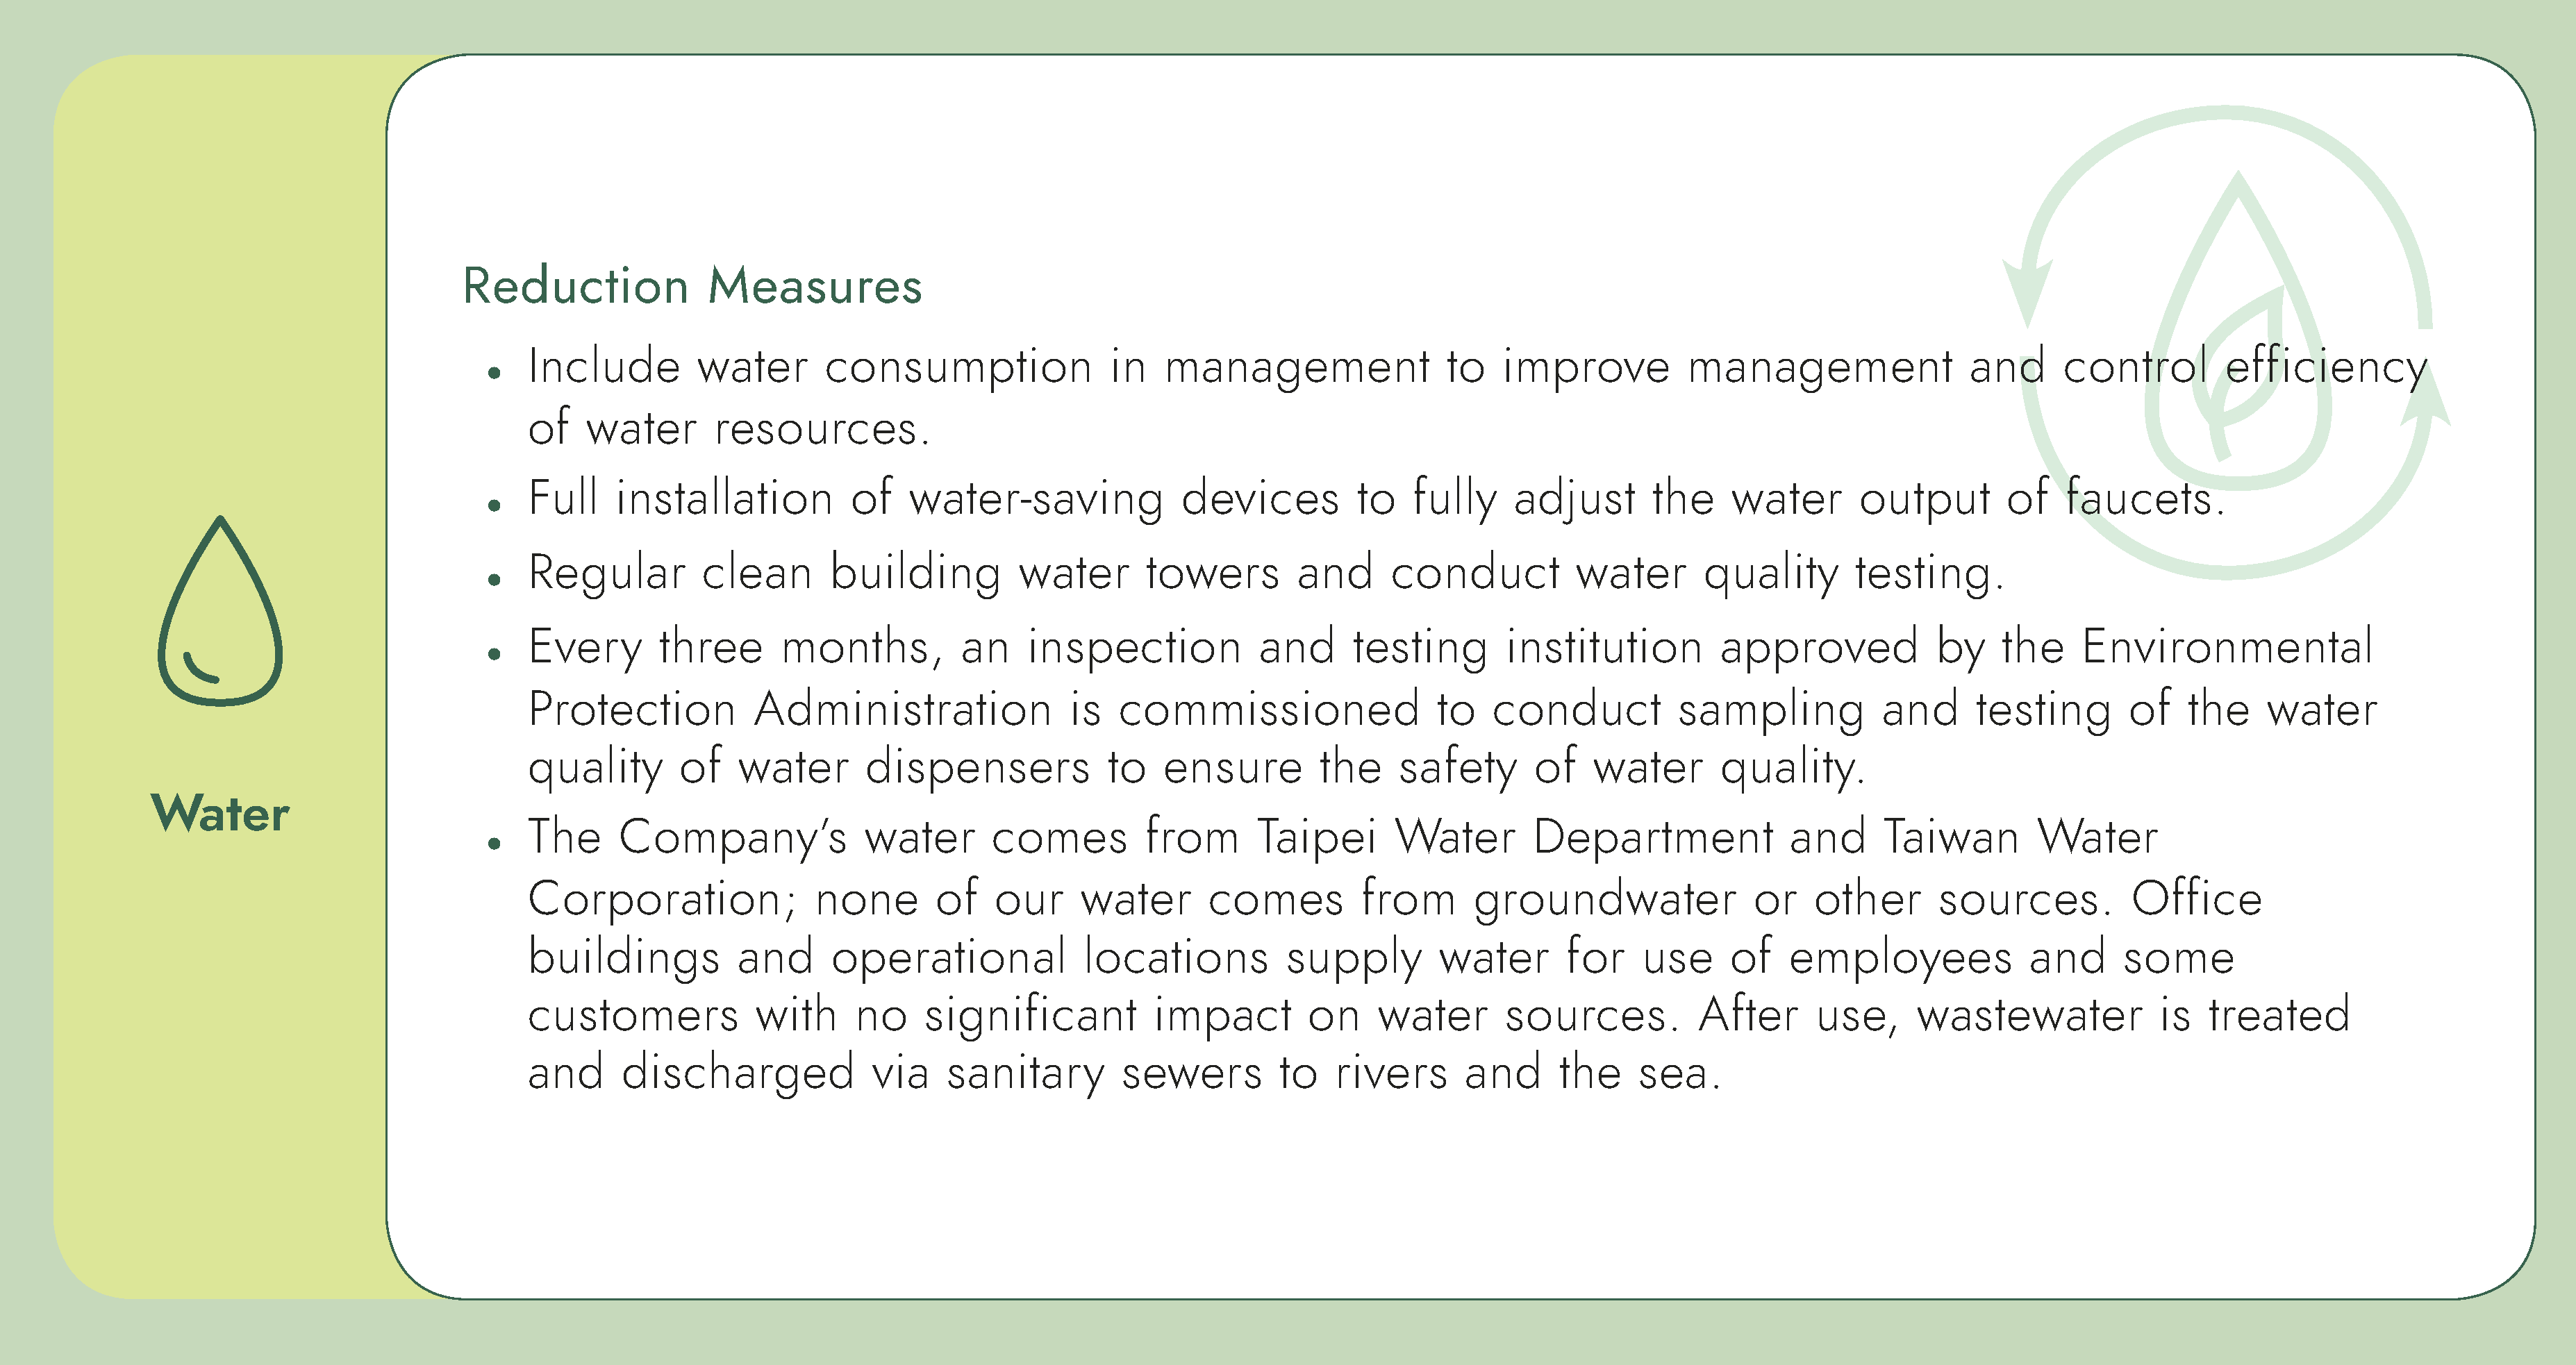 Water efficiency management performance